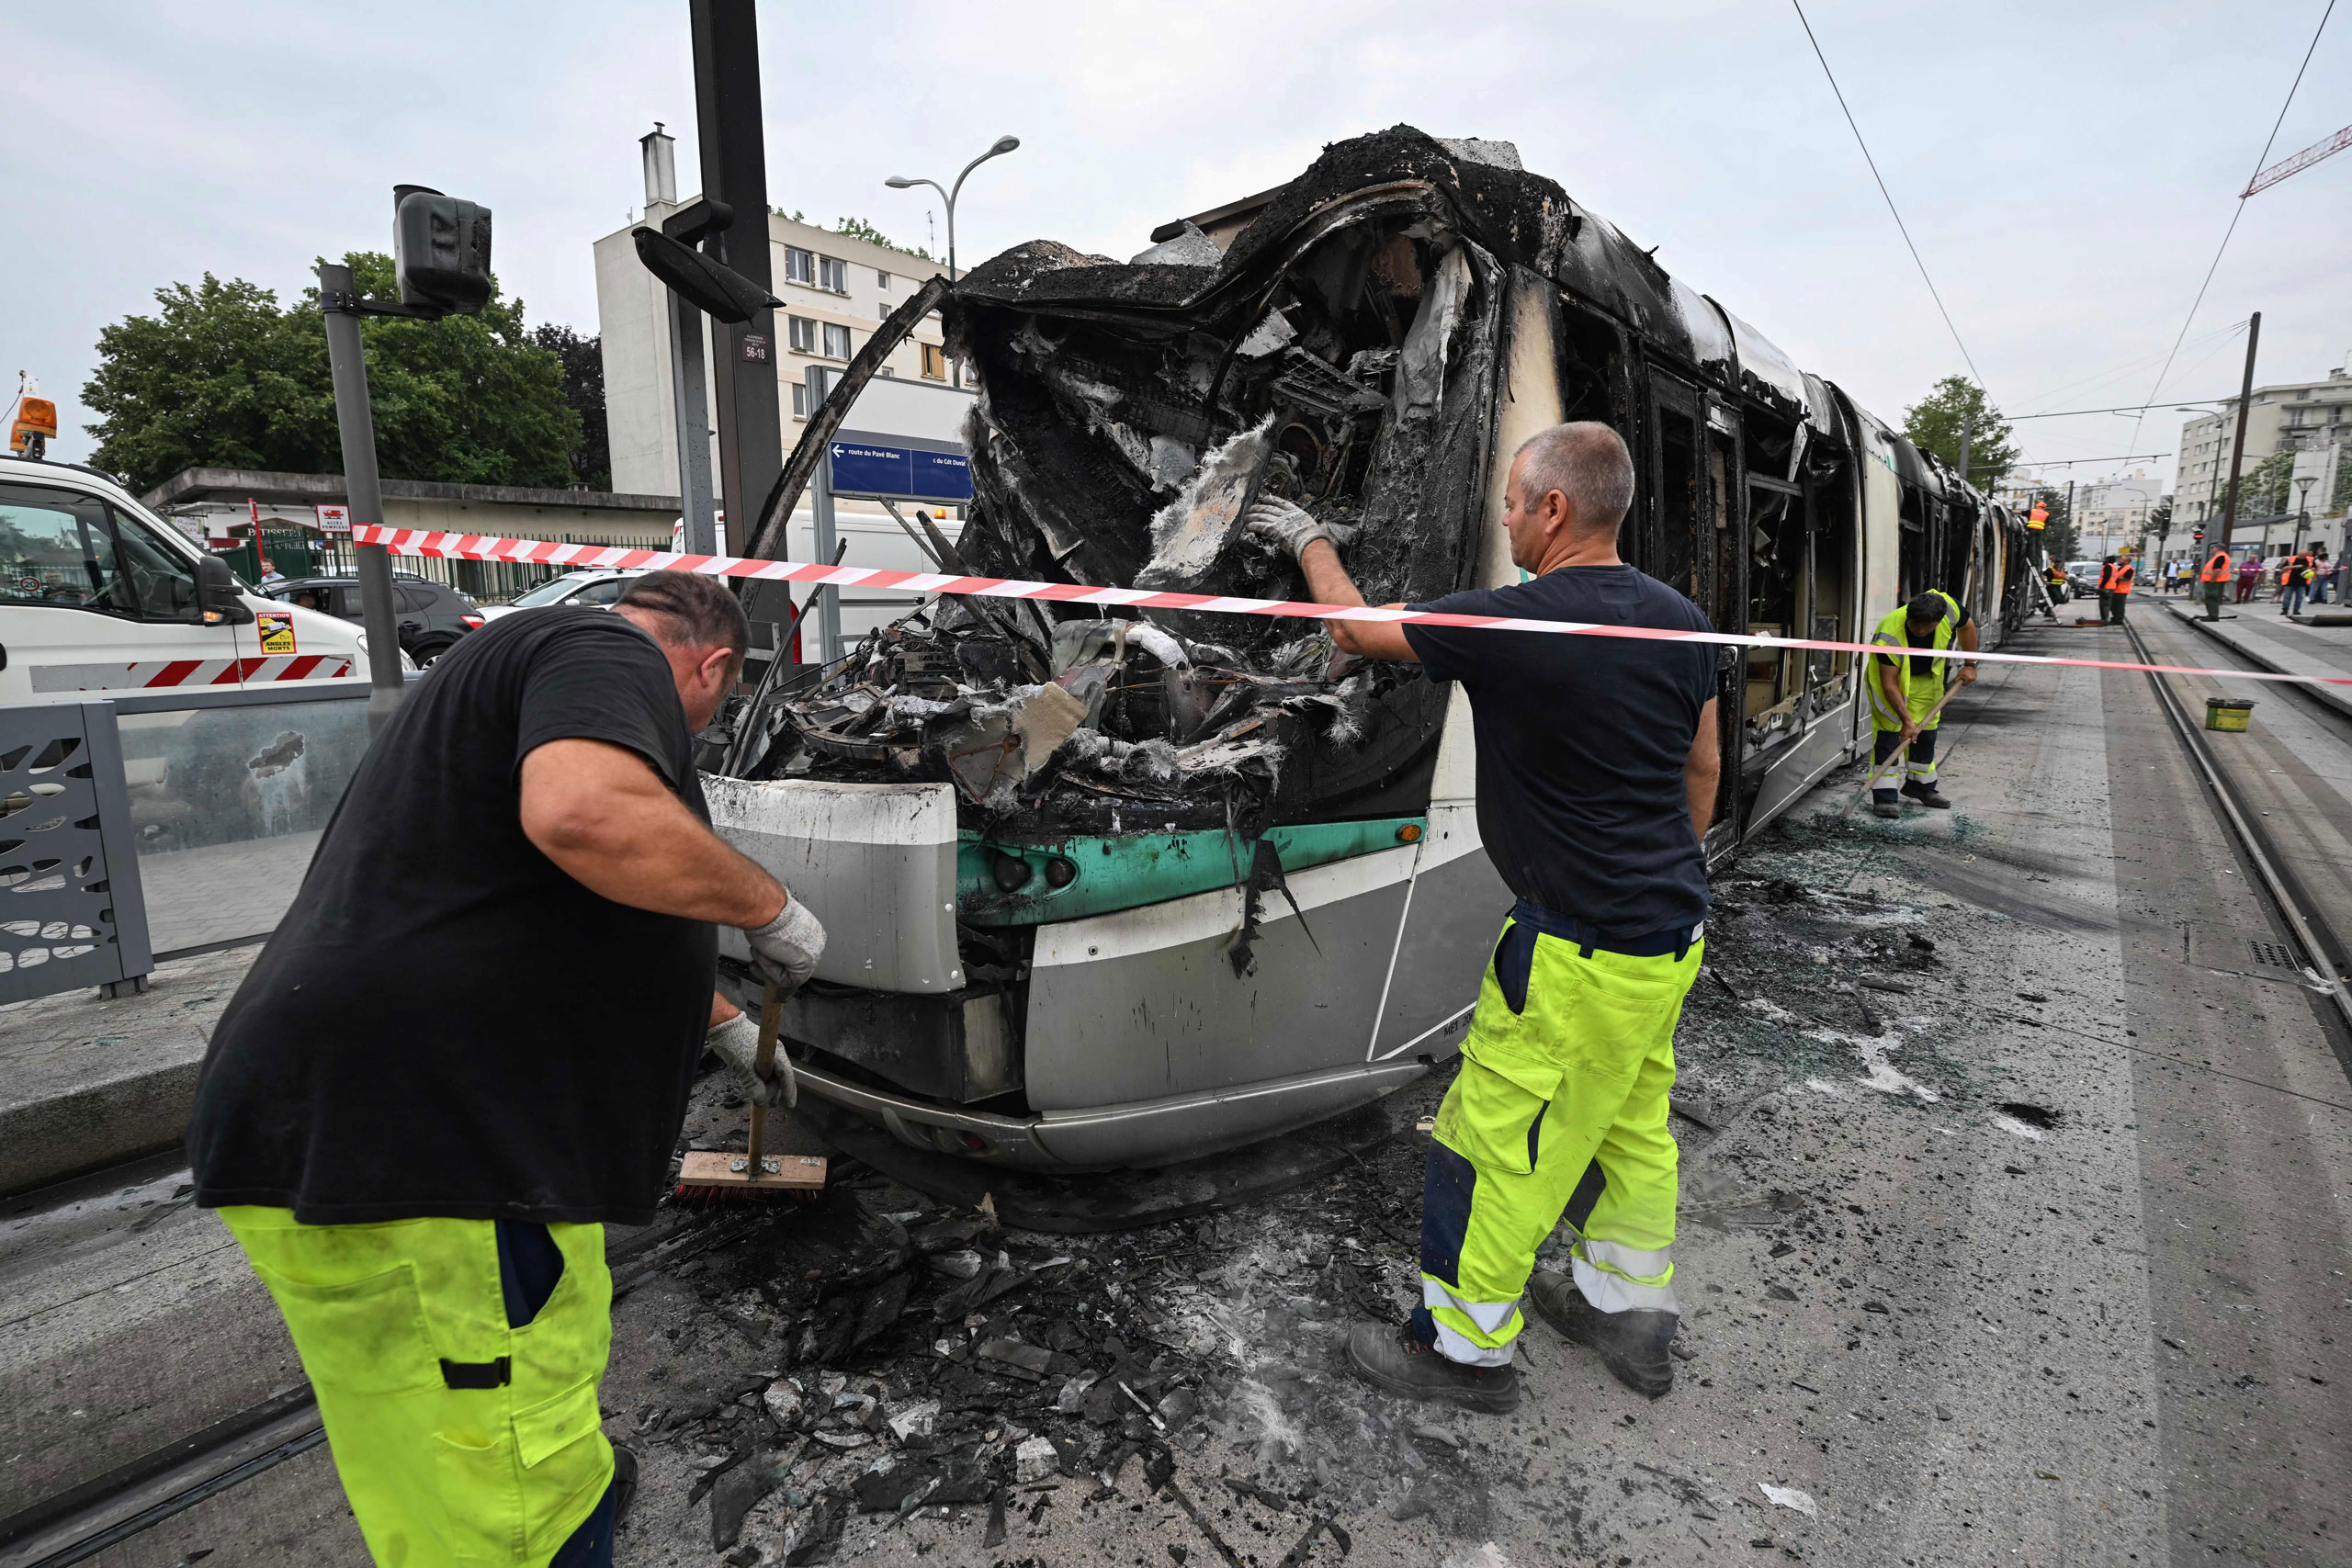 Workers clean up the debris of a burnt tram destroyed during protests the previous night in Clamart, southwest of Paris, on June 29, 2023. (Emmanuel Dunand—AFP/Getty Images)